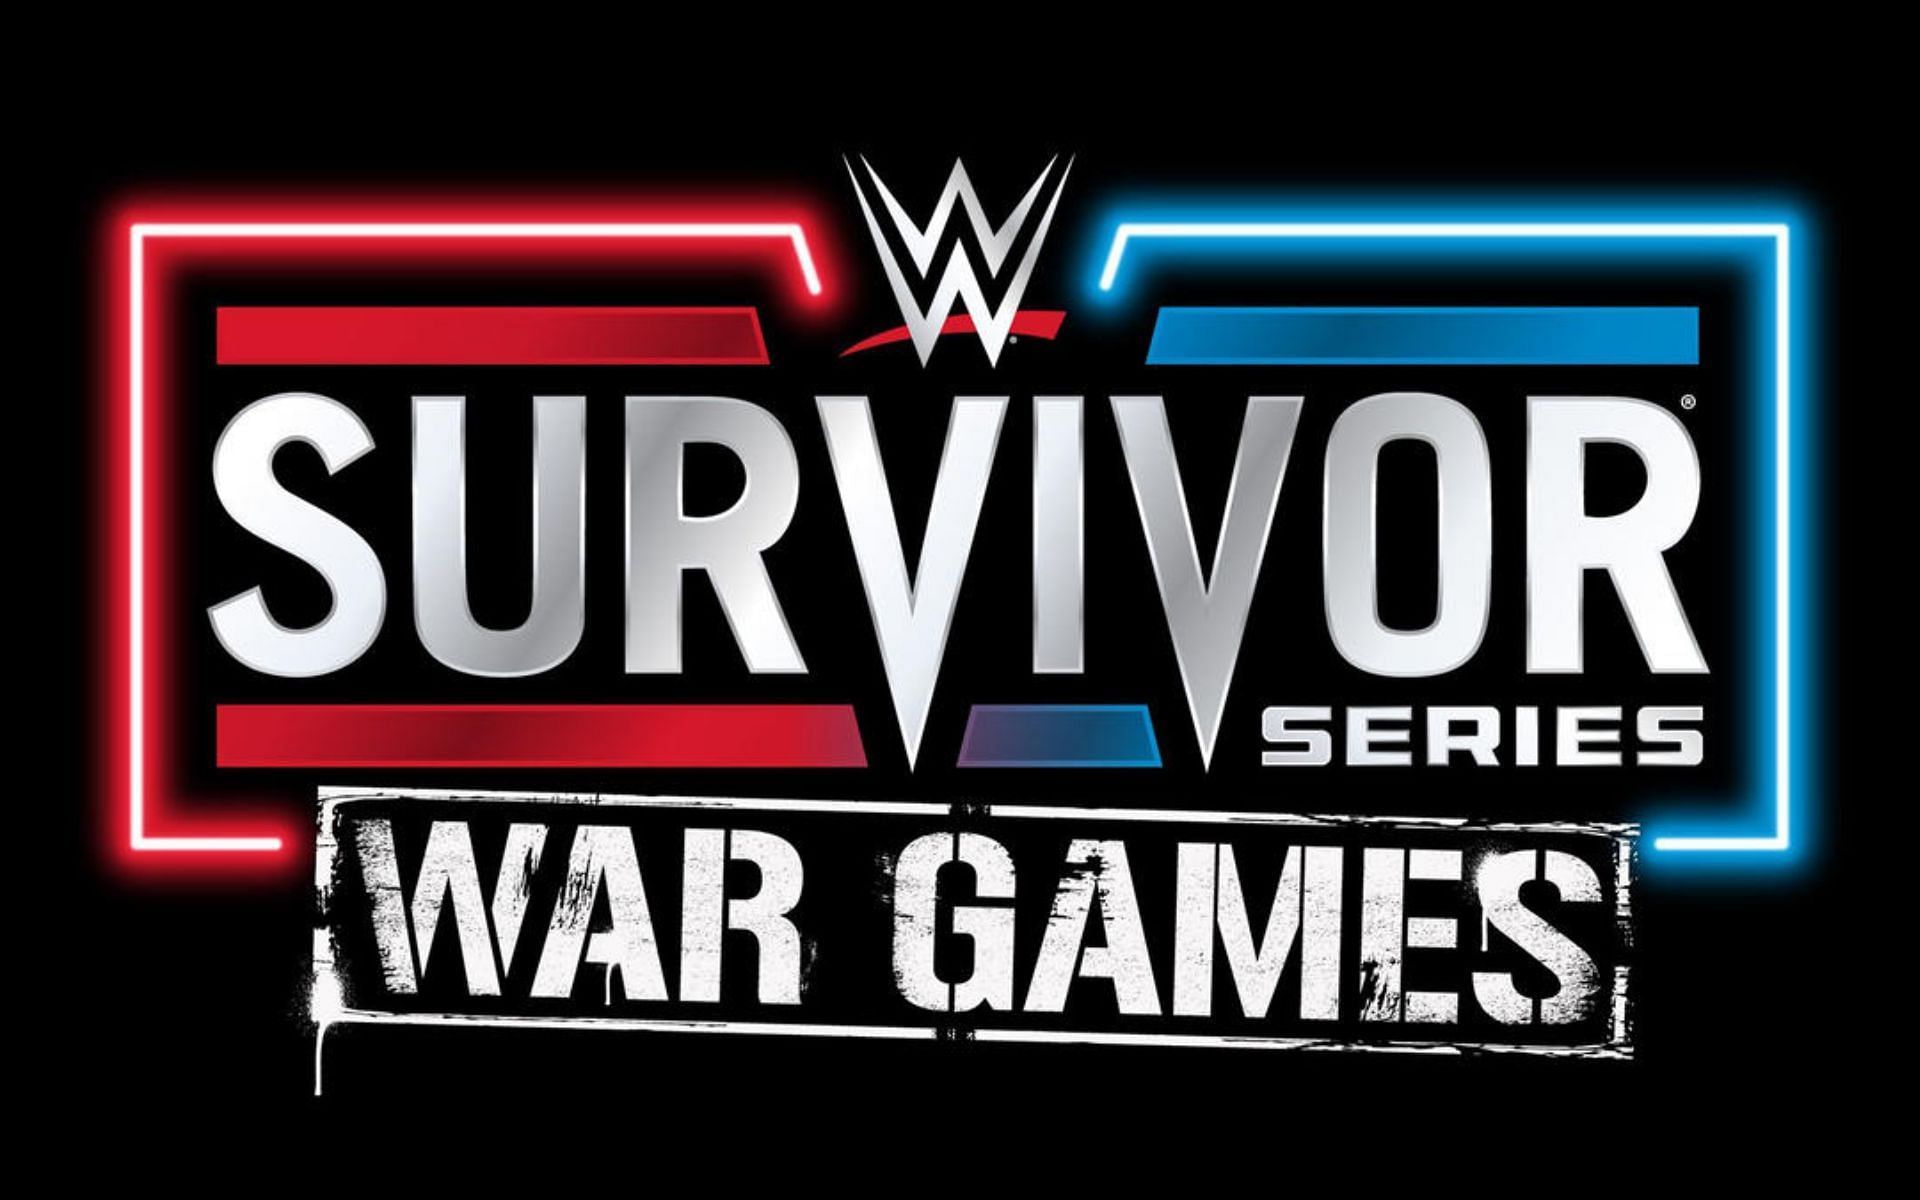 WarGames will be happening on the main roster for the first time!